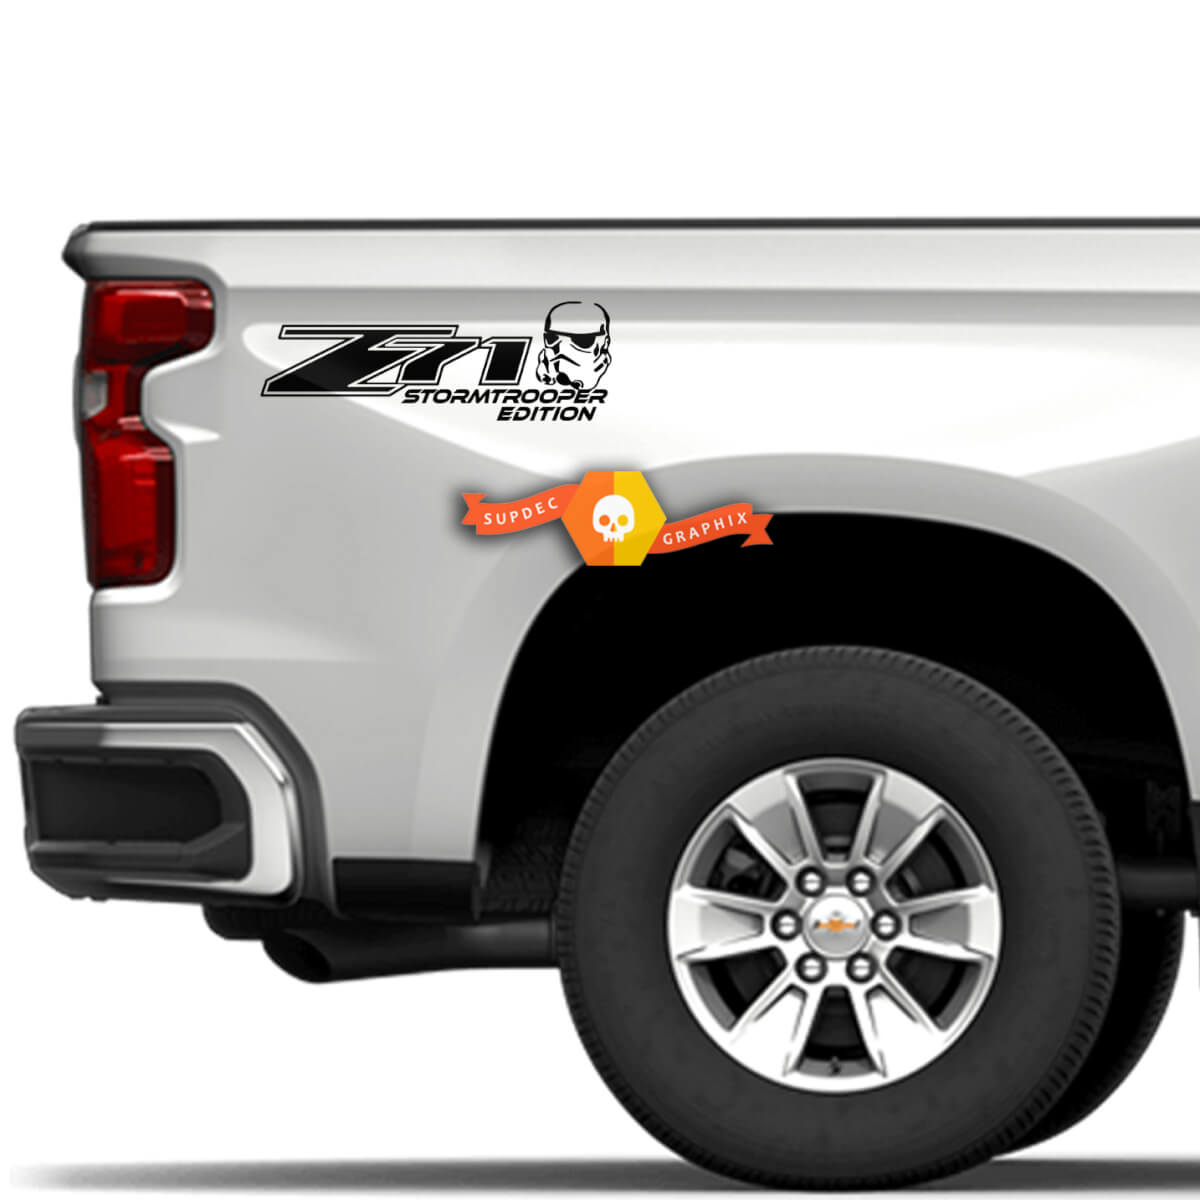 Coppia Z71 Stormtrooper Edition Decal Silverado Chevrolet Chevy 4x4 Truck Off-Road Decals